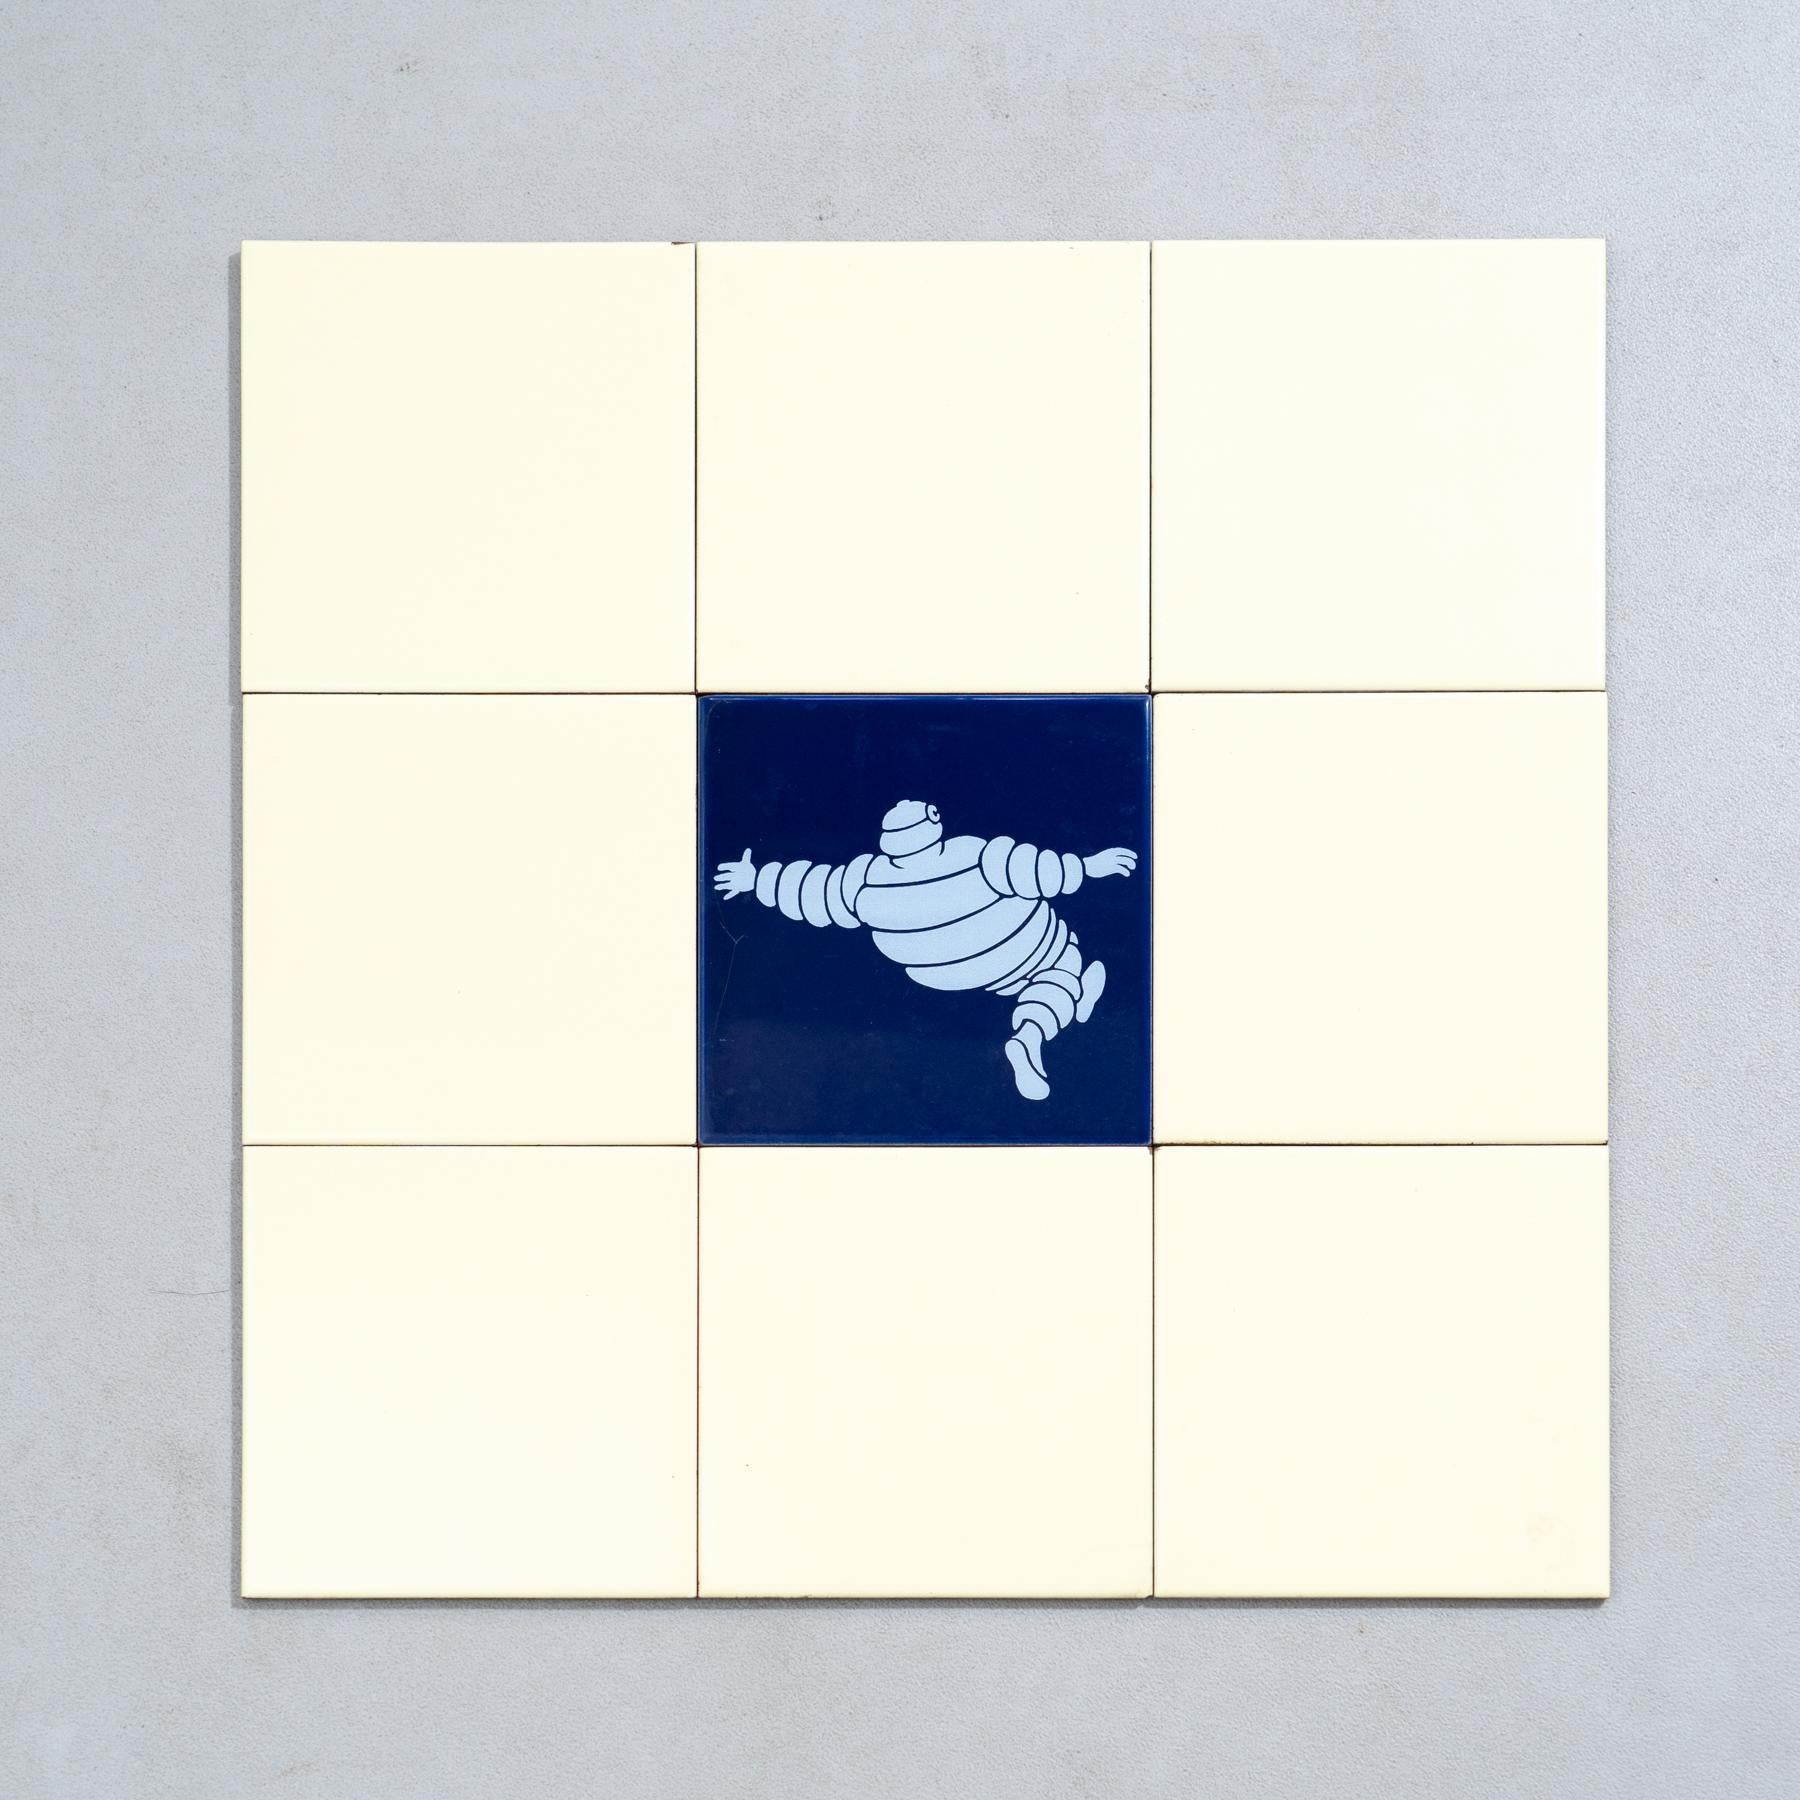 Embark on a journey of vintage charm with this exceptional set of nine tiles, featuring the iconic Michelin Man in a vibrant blue centerpiece, surrounded by original yellow tiles. Crafted by an unknown manufacturer in Spain circa 1960, this set is a